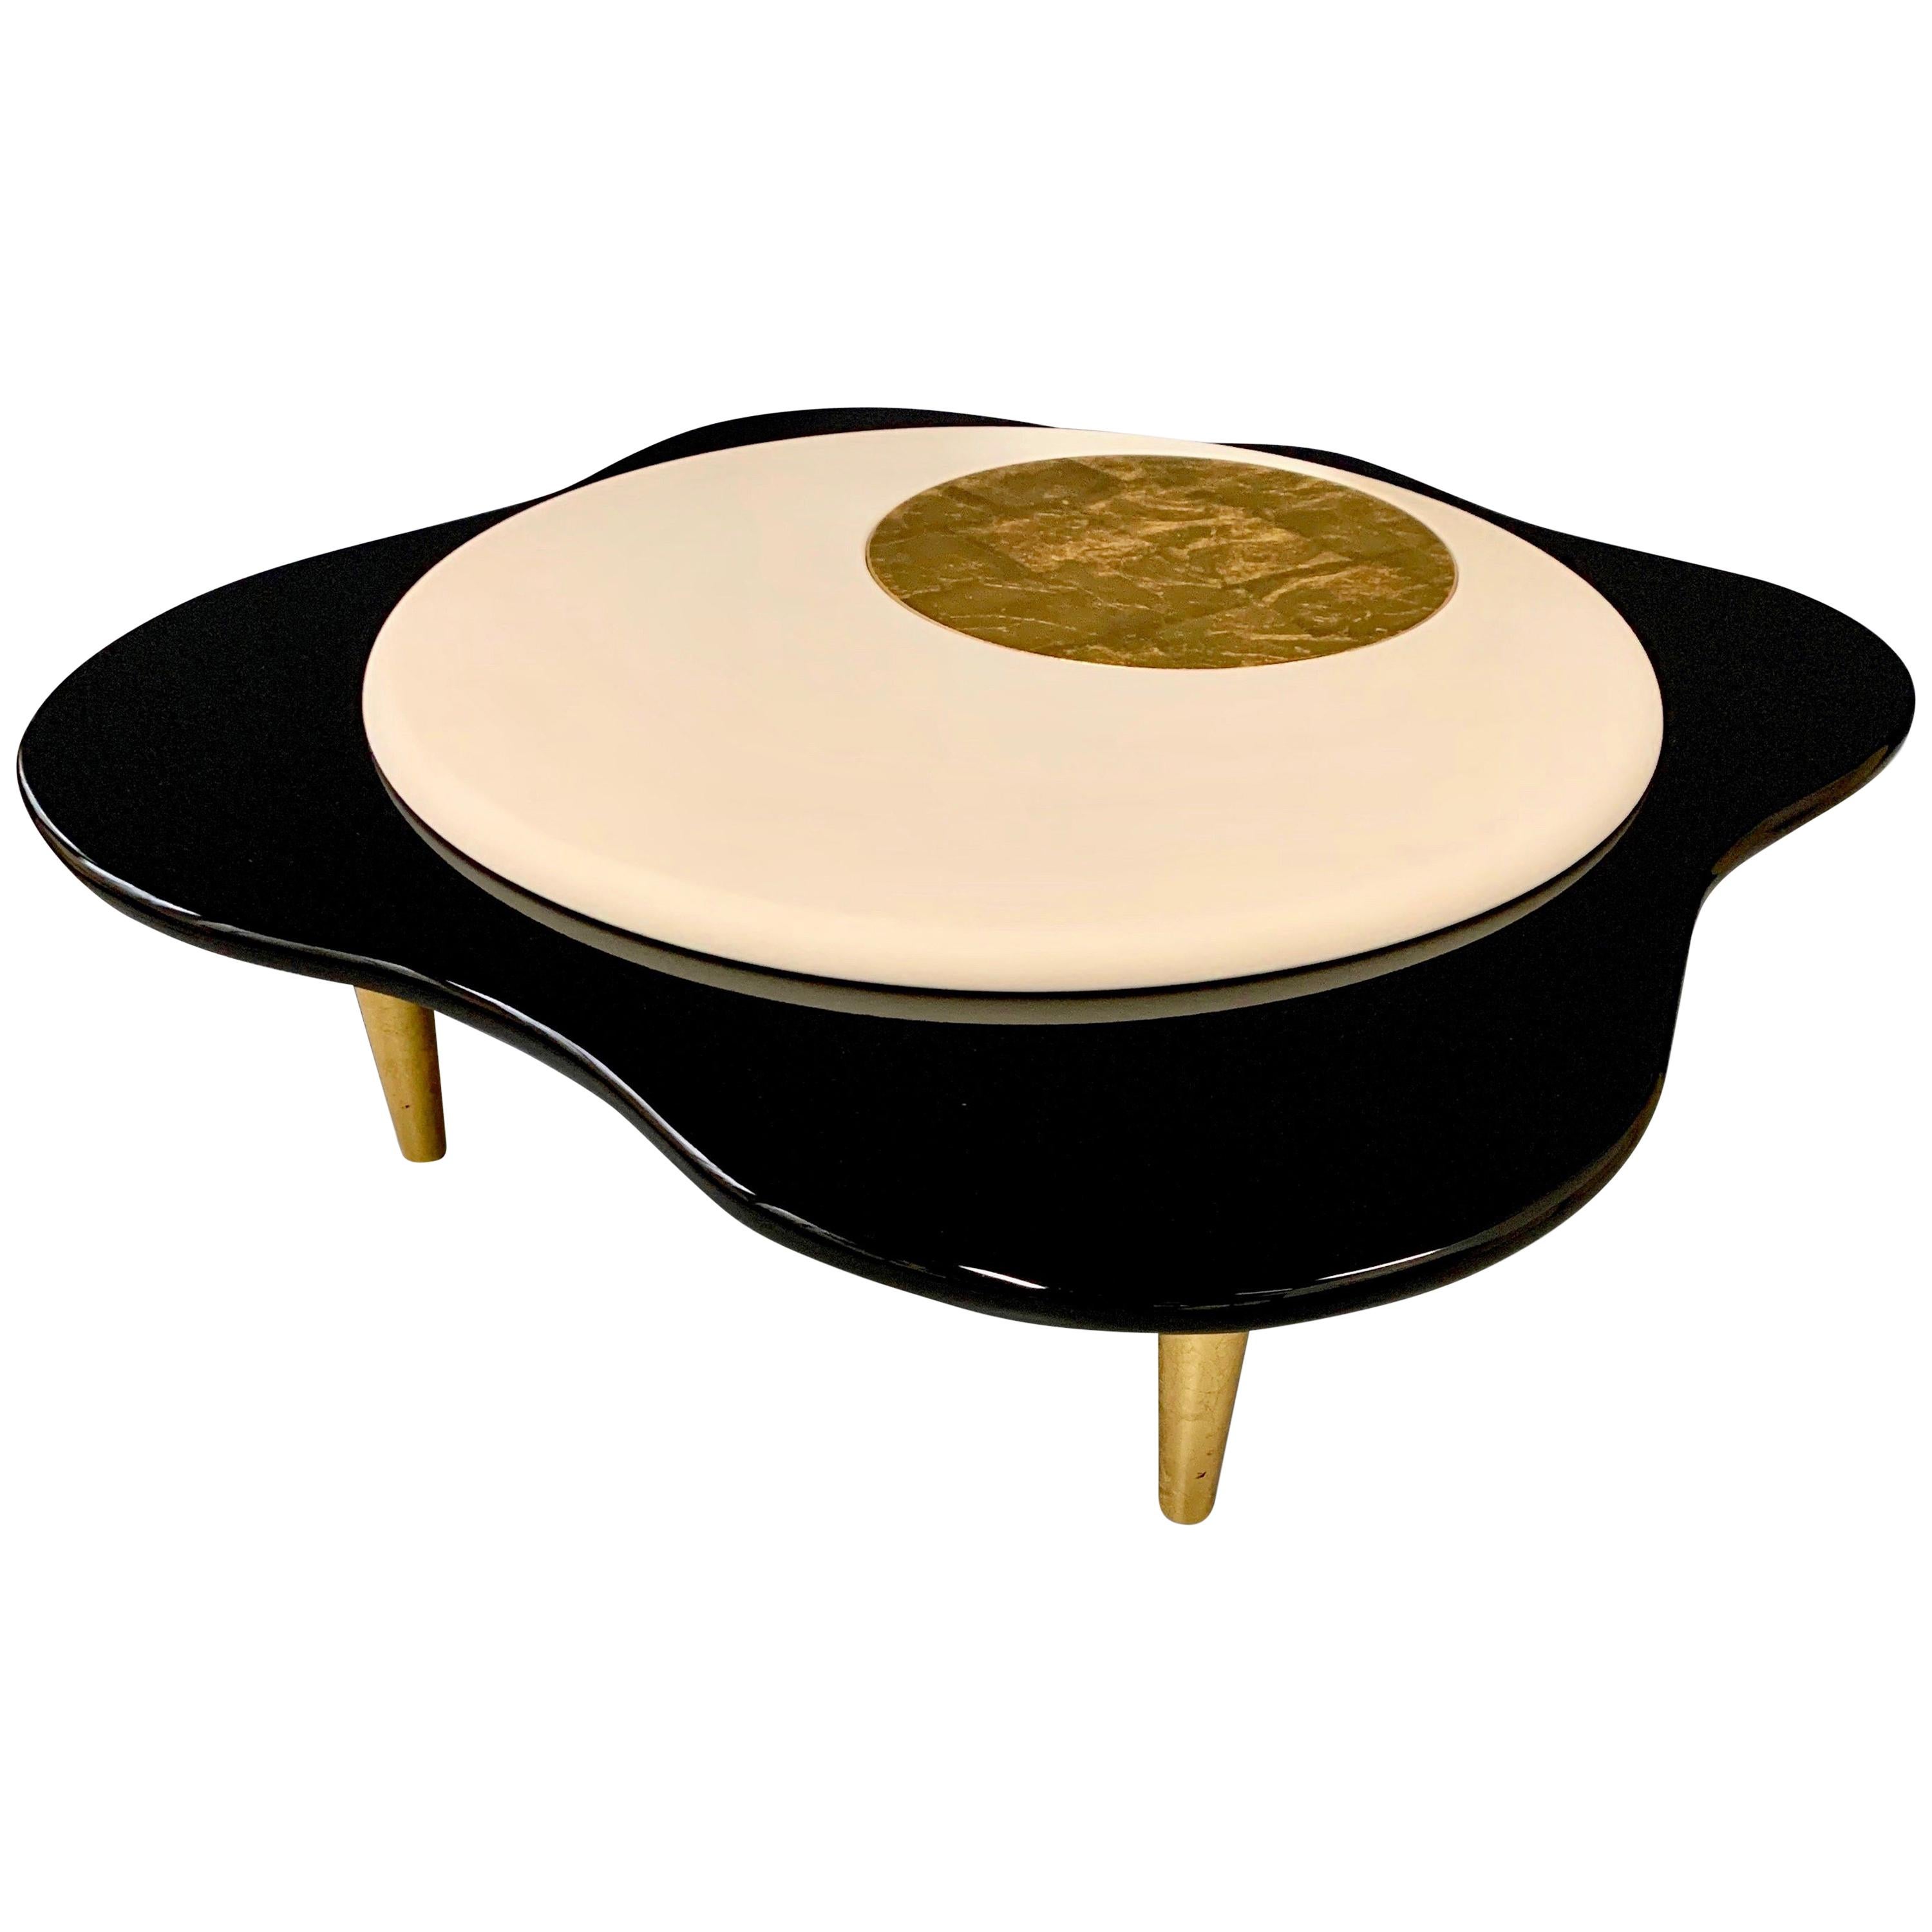 Rougier Freeform Leather, Gold Leaf and Lacquer Postmodern Coffee Table